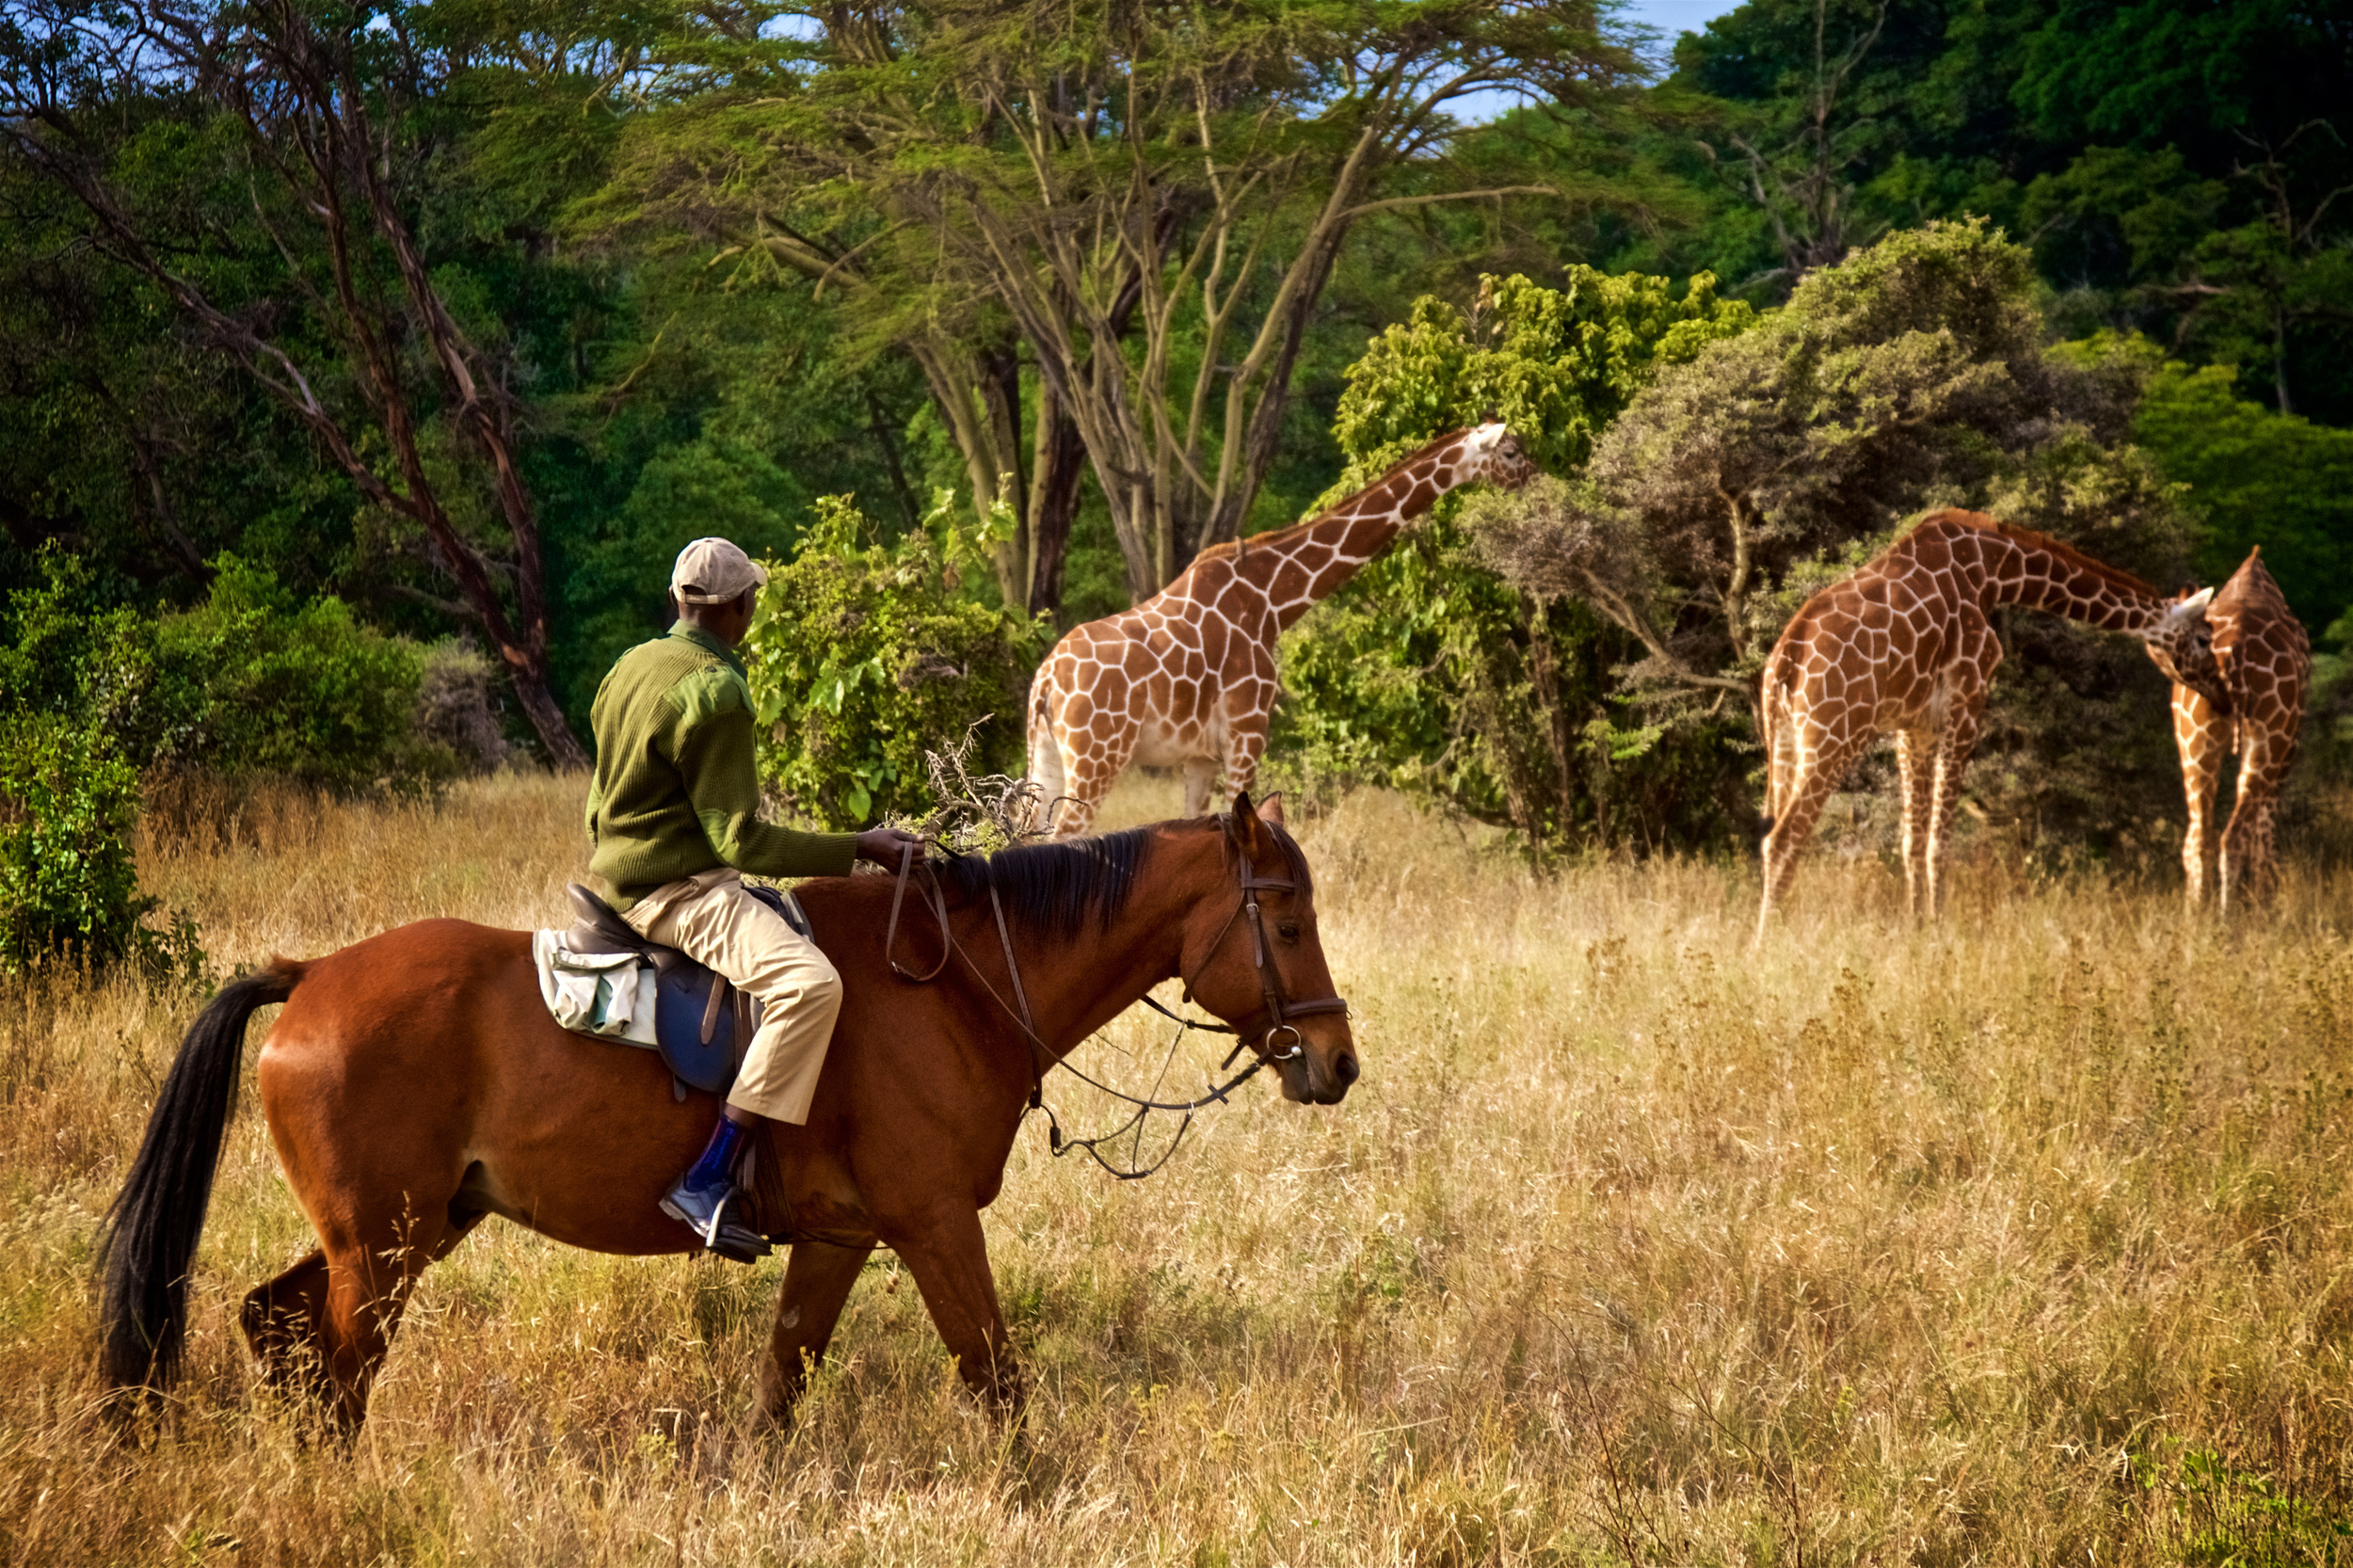 <p>Kenya is synonymous with safari. And while it’s exciting to roll around in a jeep spotting lions, cheetahs, and rhinos (oh my), one of the more unique experiences is to do so on horseback. </p><p>You may also like: <a href='https://www.yardbarker.com/lifestyle/articles/too_sweet_24_of_the_oldest_candy_bars_still_available_121923/s1__39111177'>Too sweet: 24 of the oldest candy bars still available</a></p>